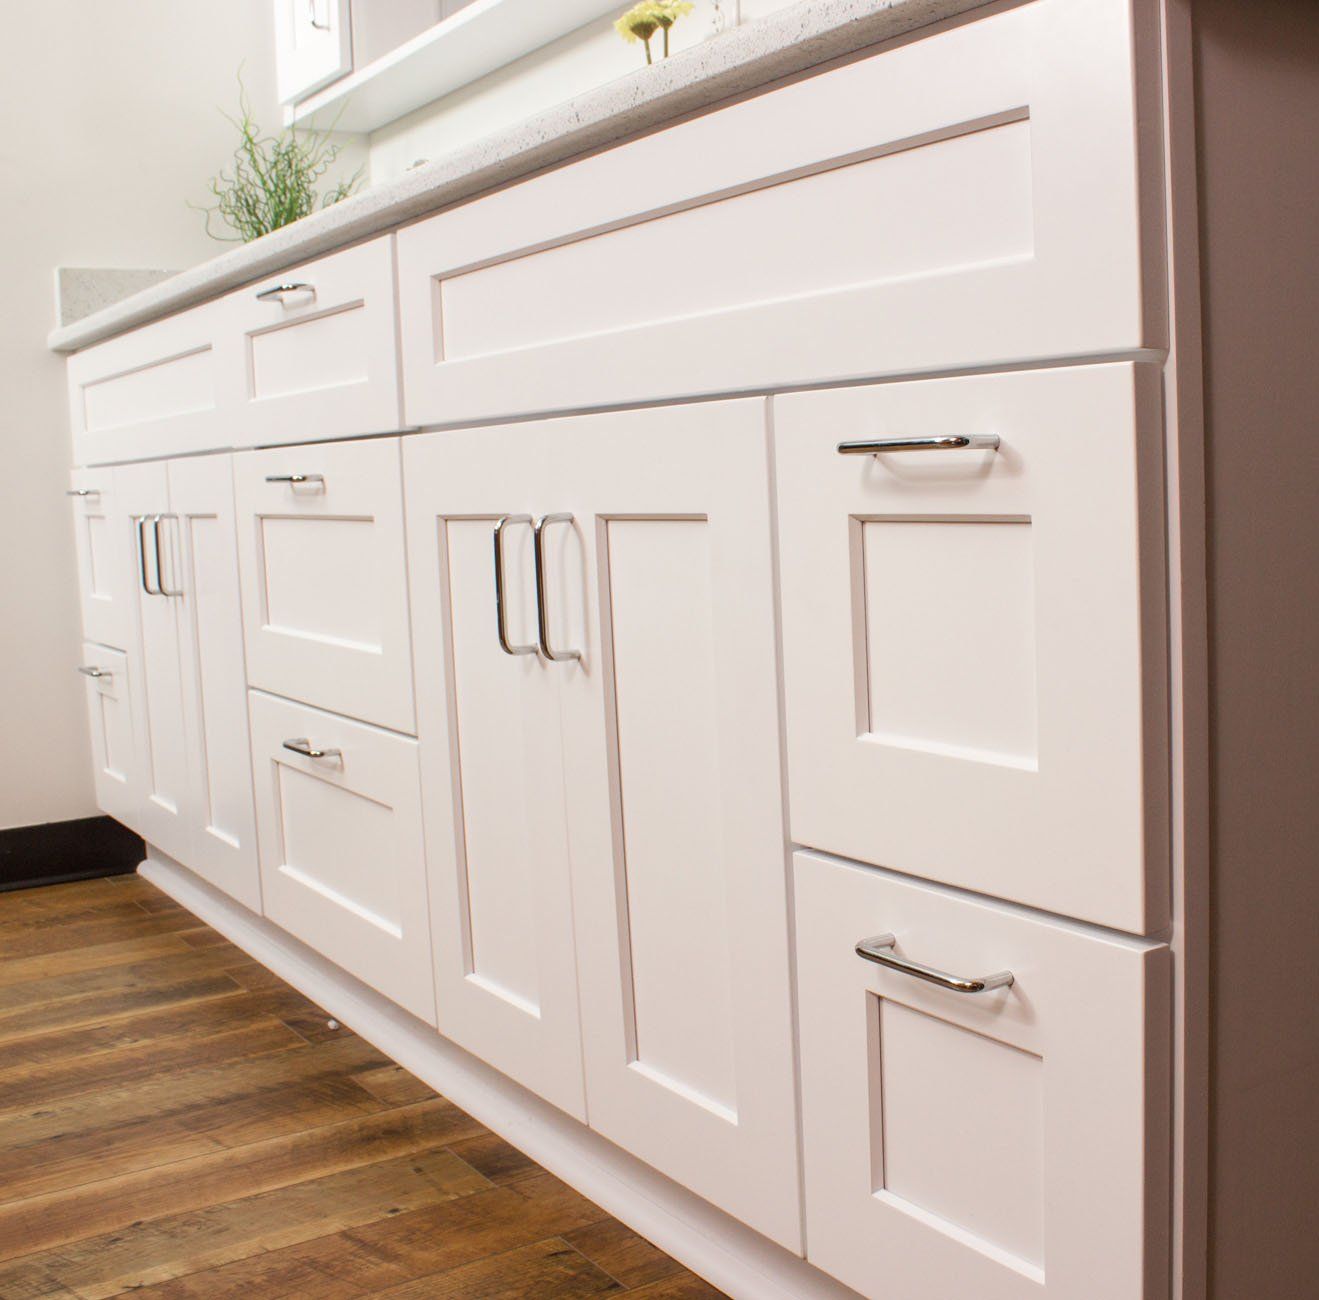 Wholesale Cabinets in Wilmington, NC